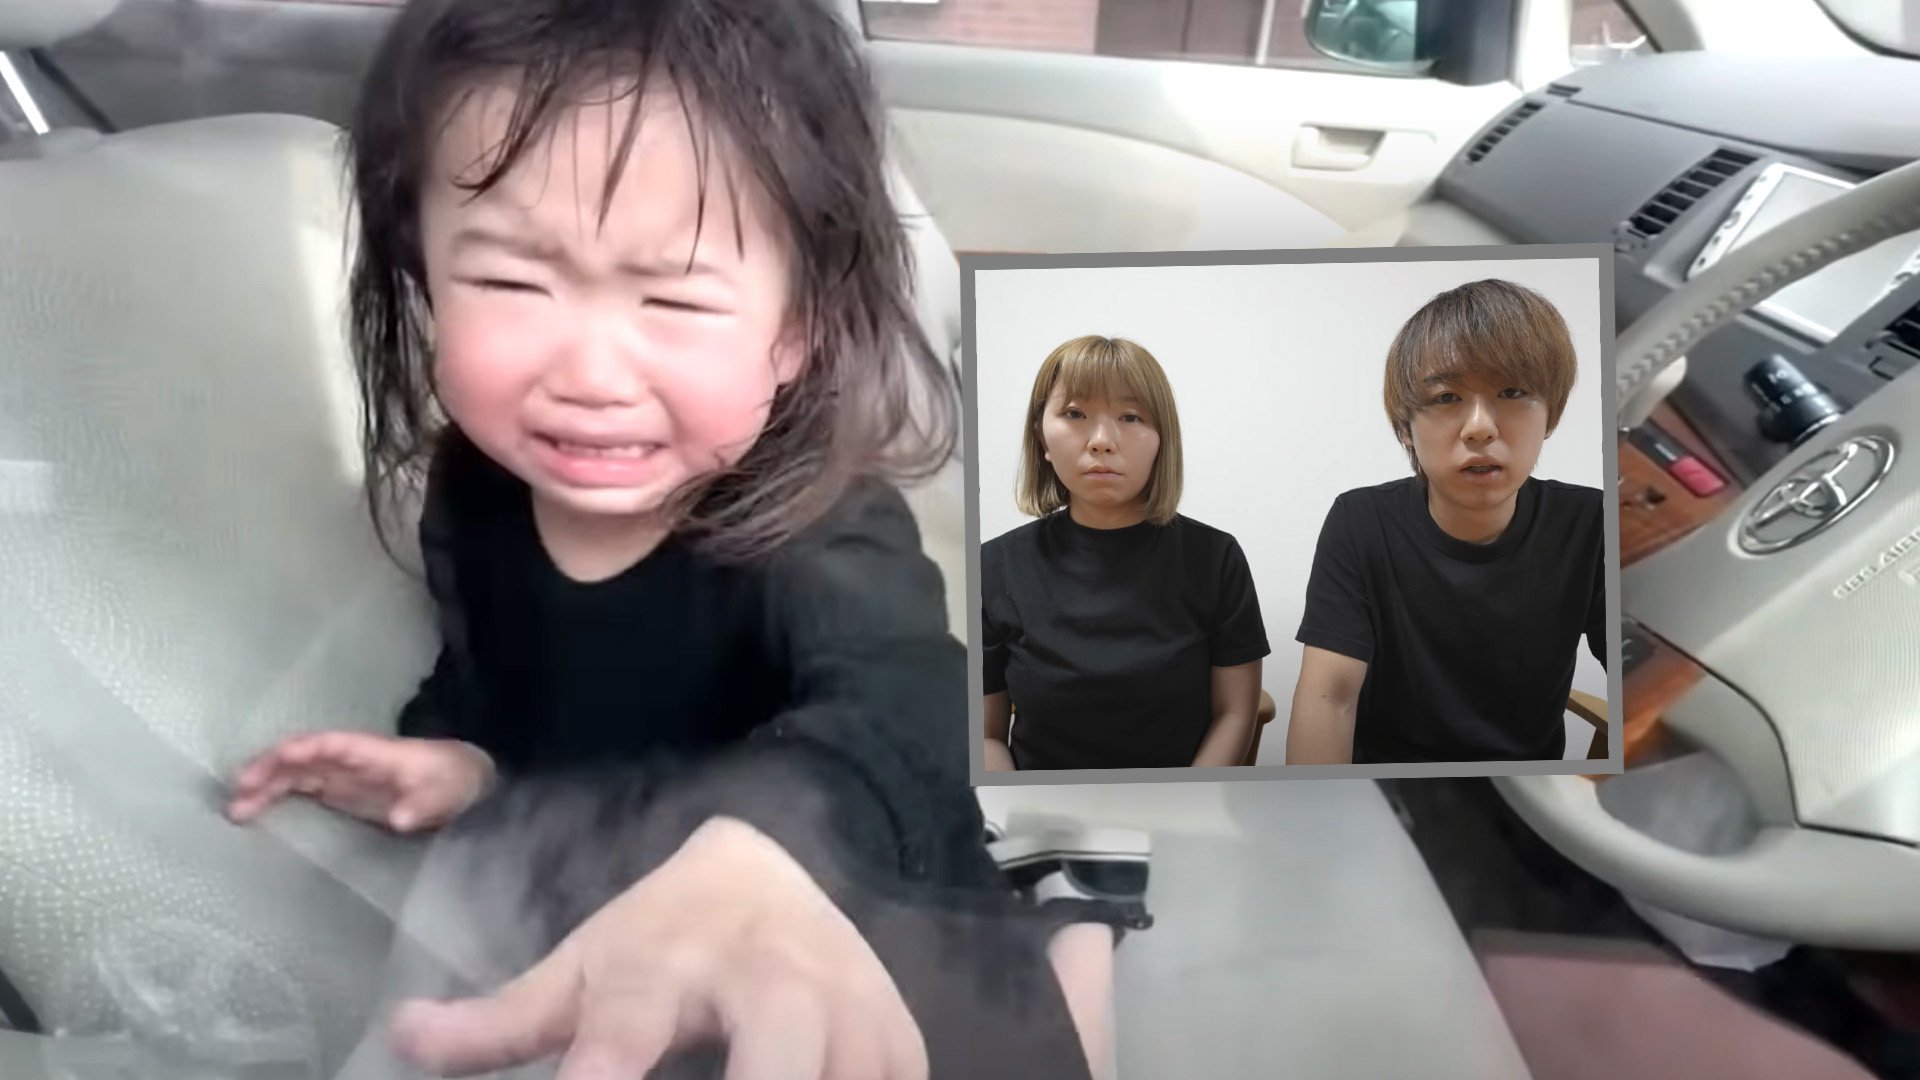 A Japanese couple have sparked outrage online after they filmed their toddler daughter trapped inside their locked car on a hot day instead of seeking immediate help to secure her release. Photo: SCMP composite/YouTube